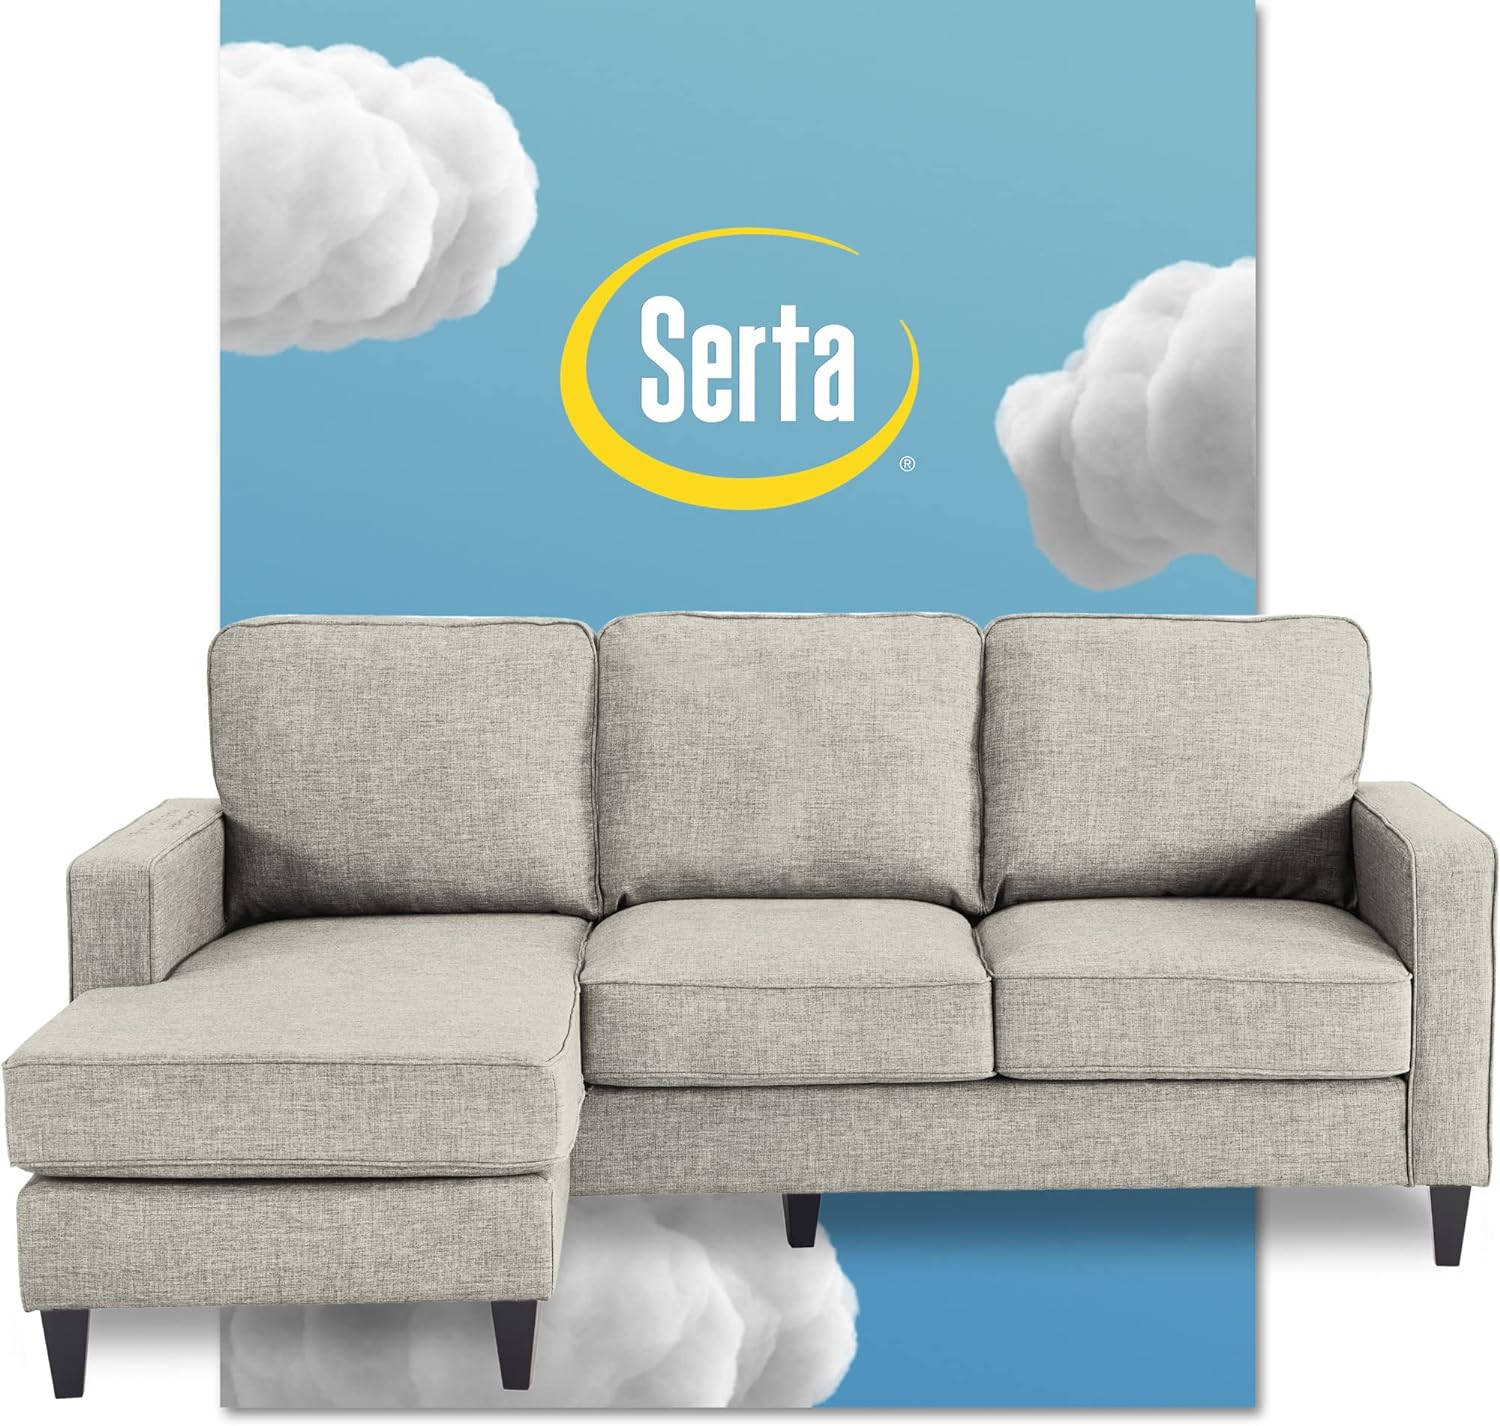 Serta Harmon Reversible Sectional Sofa, Modern L-Shaped Couch for Small Spaces, Soft Fabric Upholstery, Square Arm, Light Gray